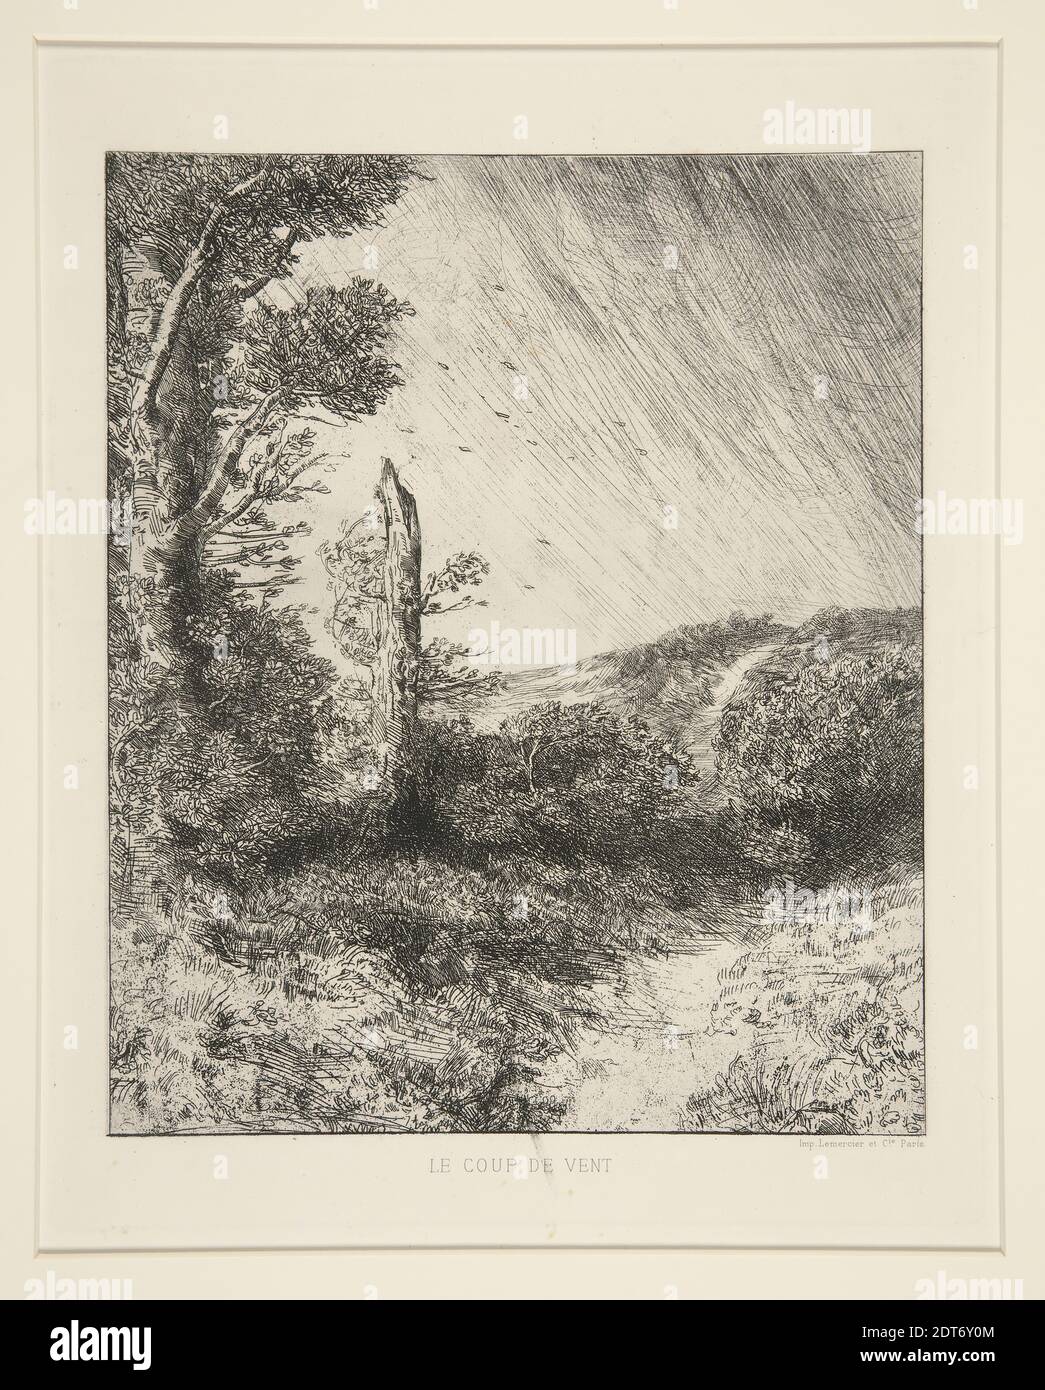 Artist: Alphonse Legros, French, 1837–1911, Le Coup de Vent (The Gust of Wind), Etching, platemark: 25.9 × 20.6 cm (10 3/16 × 8 1/8 in.), French, 19th century, Works on Paper - Prints Stock Photo